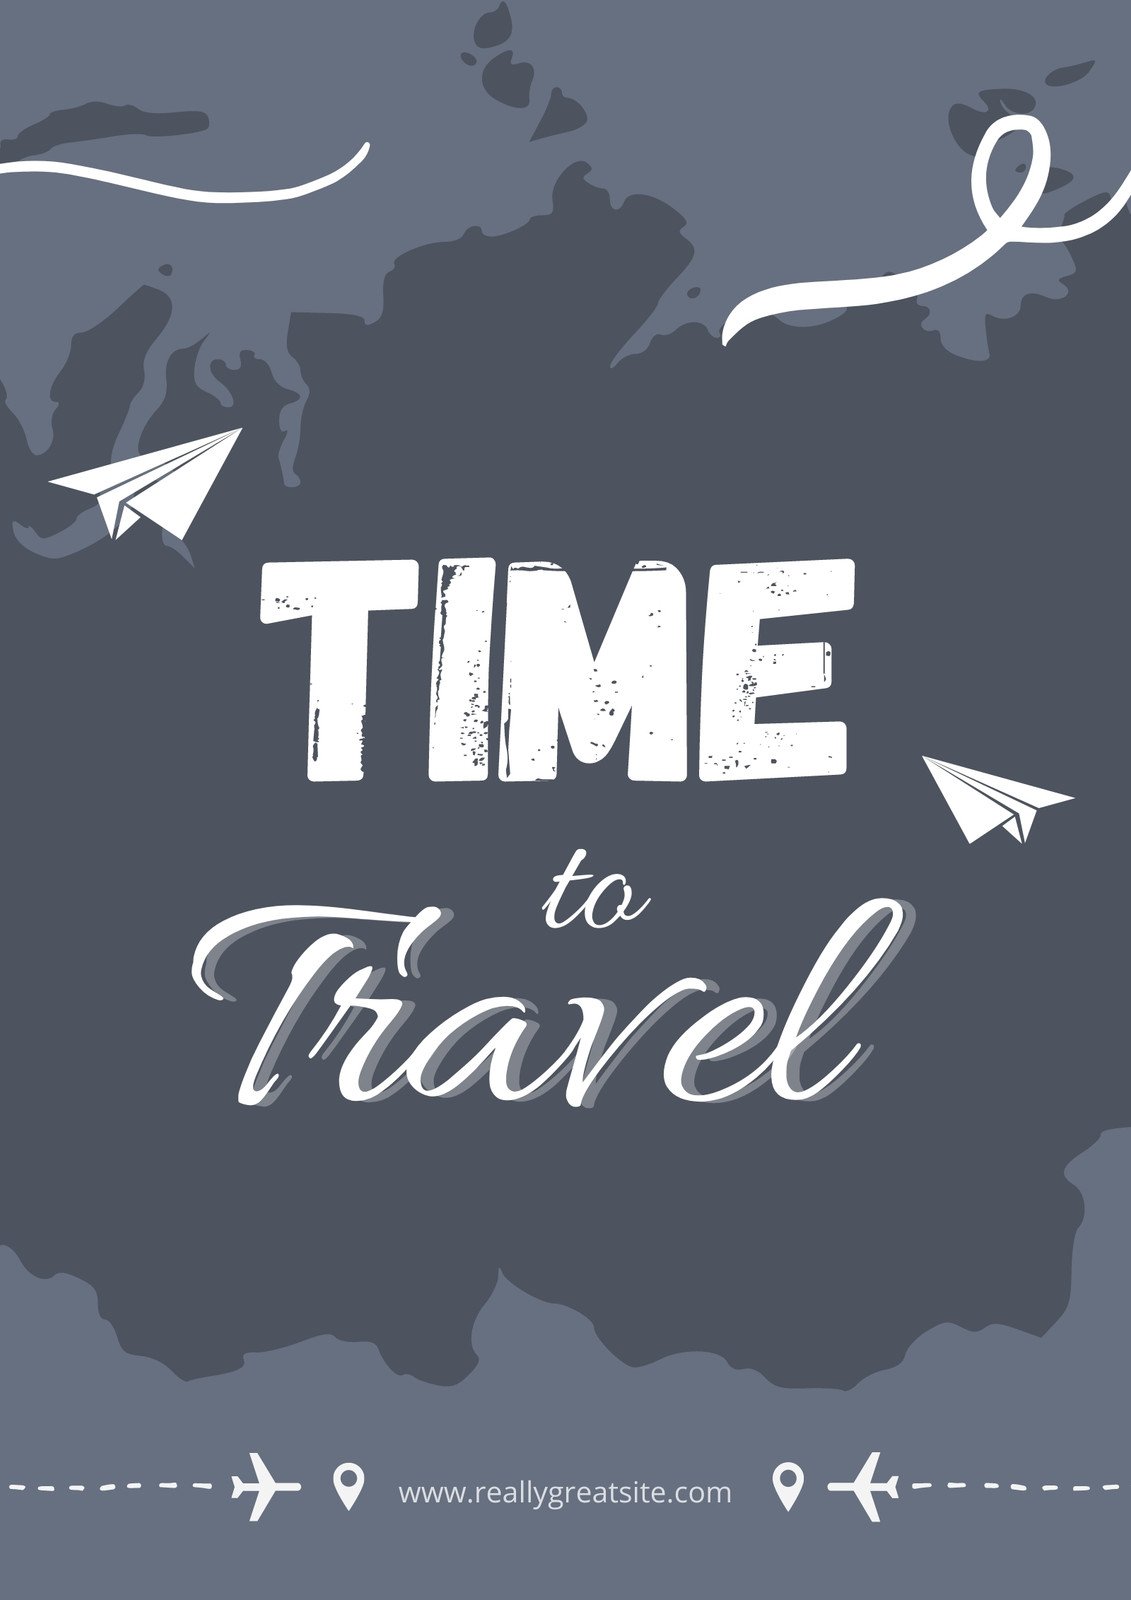 Travel App Design Projects :: Photos, videos, logos, illustrations and branding :: Behance